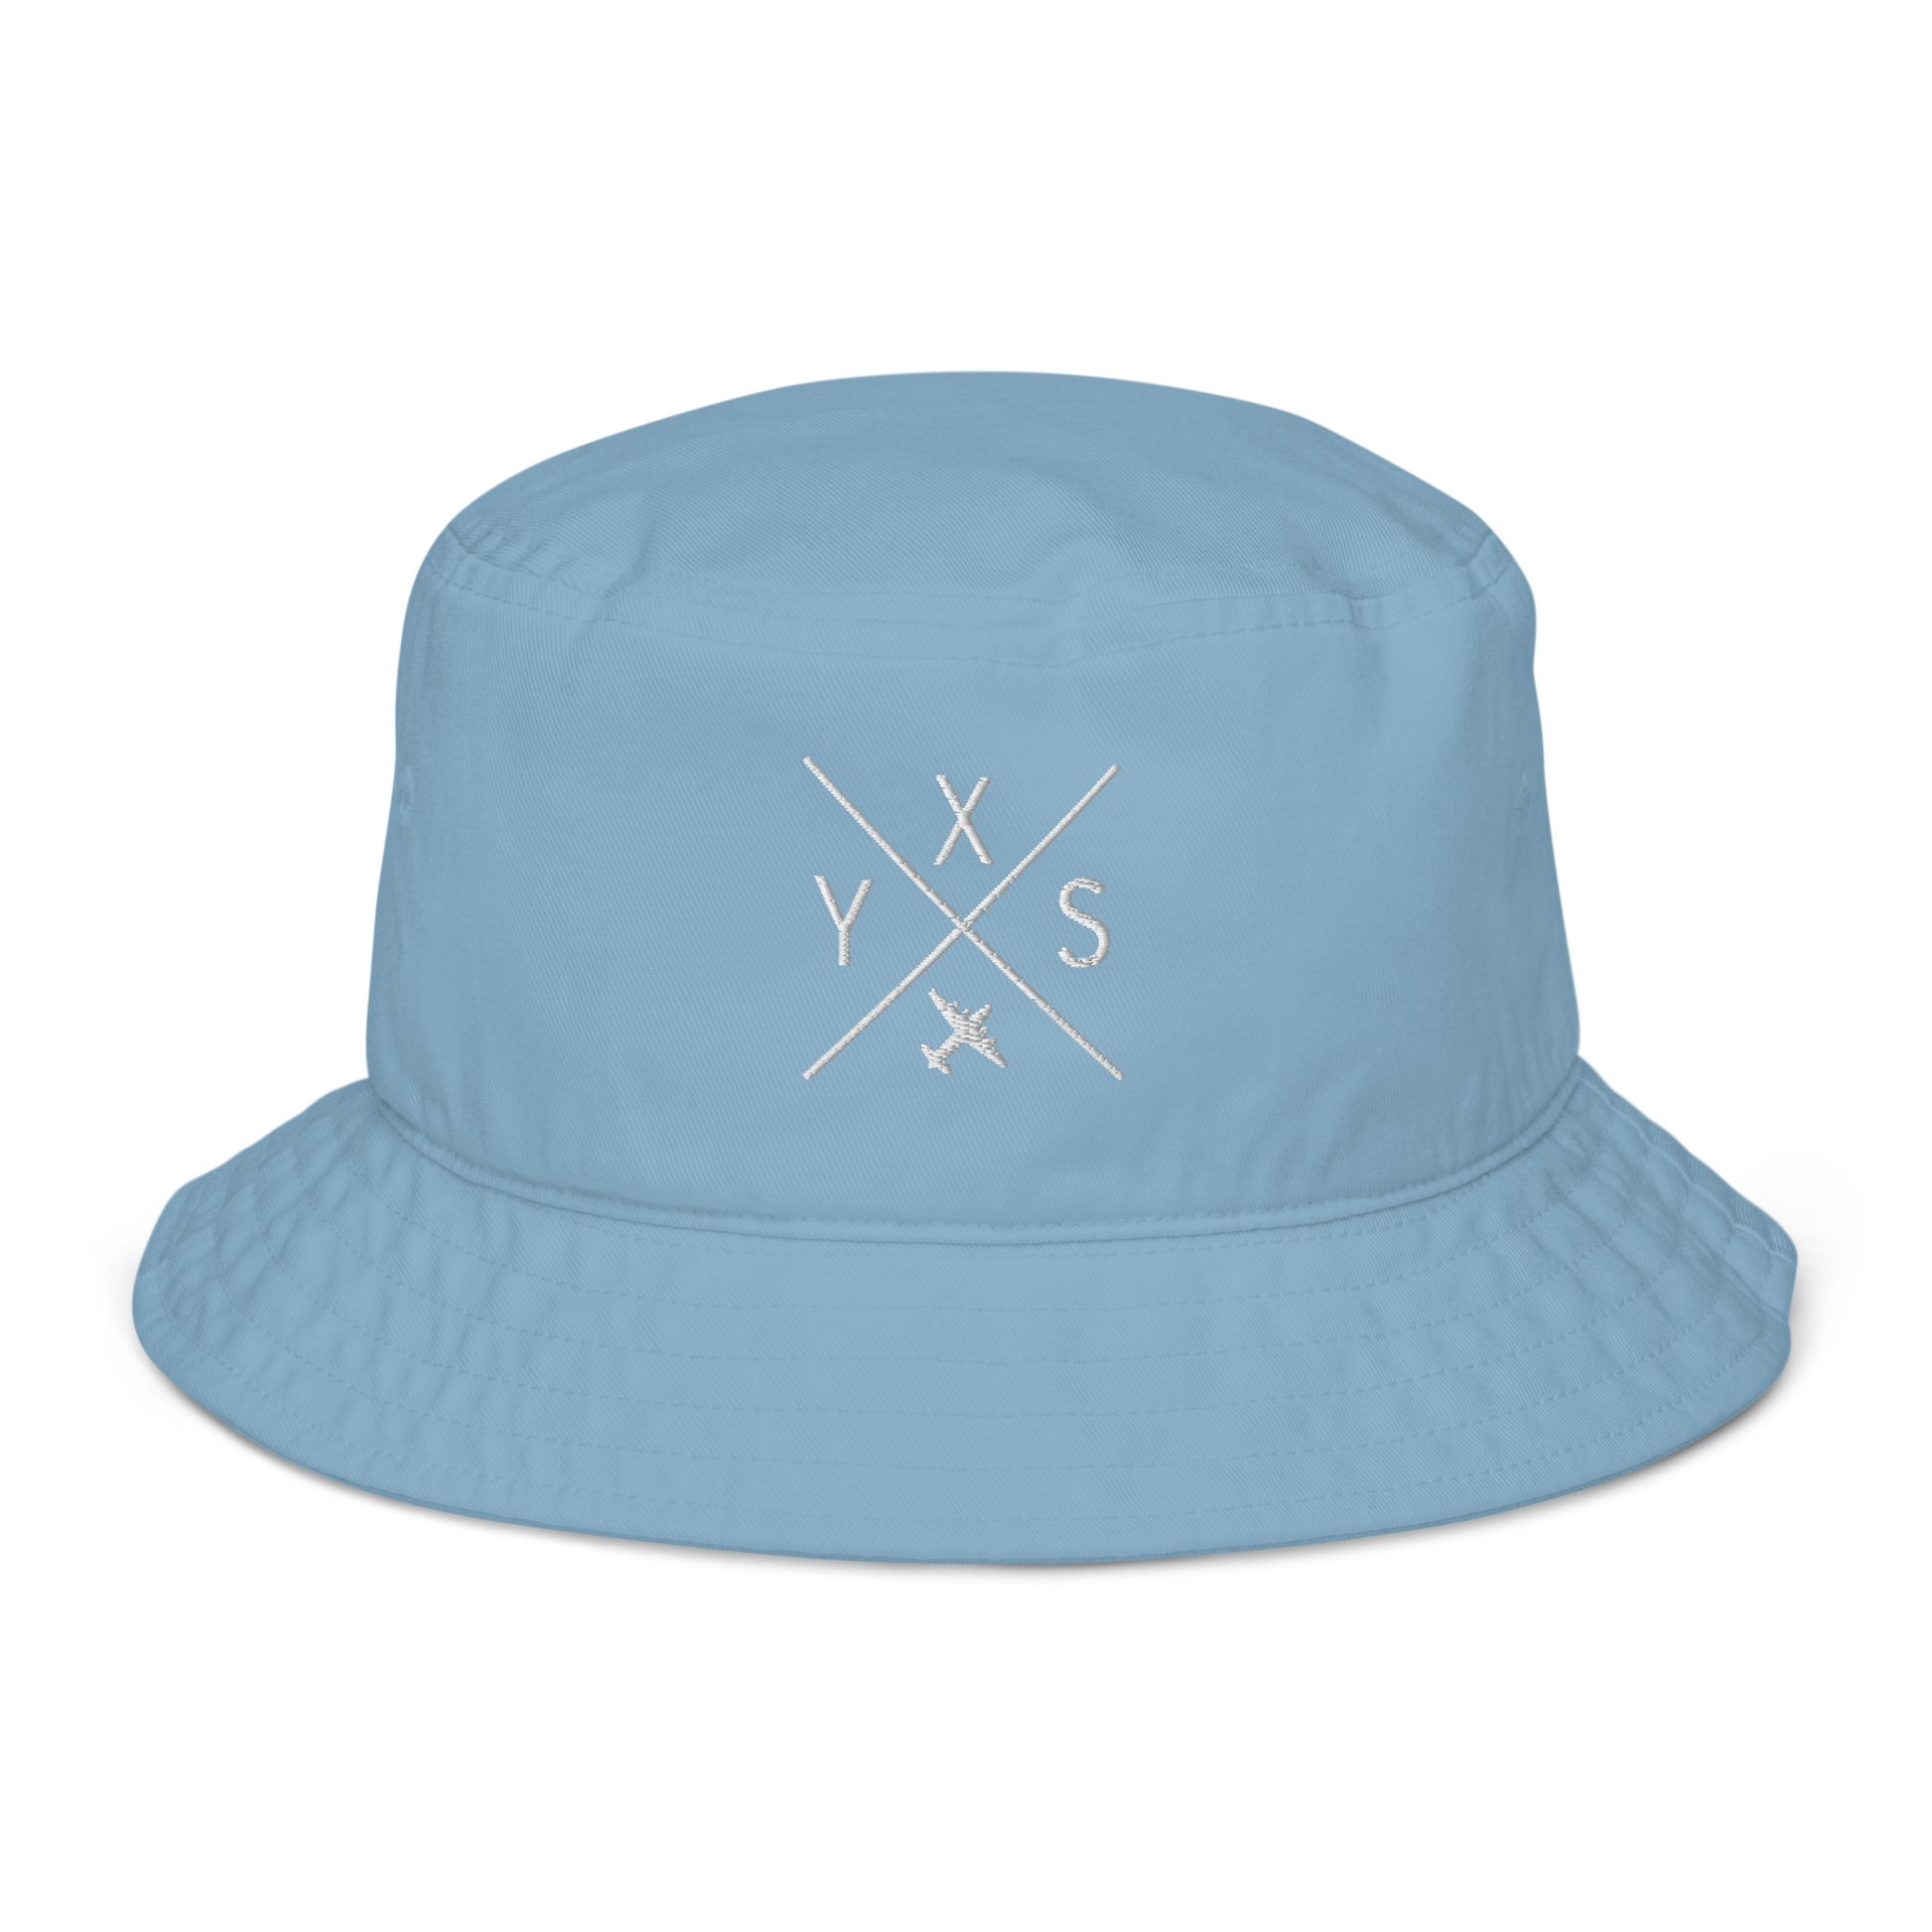 YHM Designs - YXU London Organic Cotton Bucket Hat - Crossed-X Design with Airport Code and Vintage Propliner - White Embroidery - Image 07